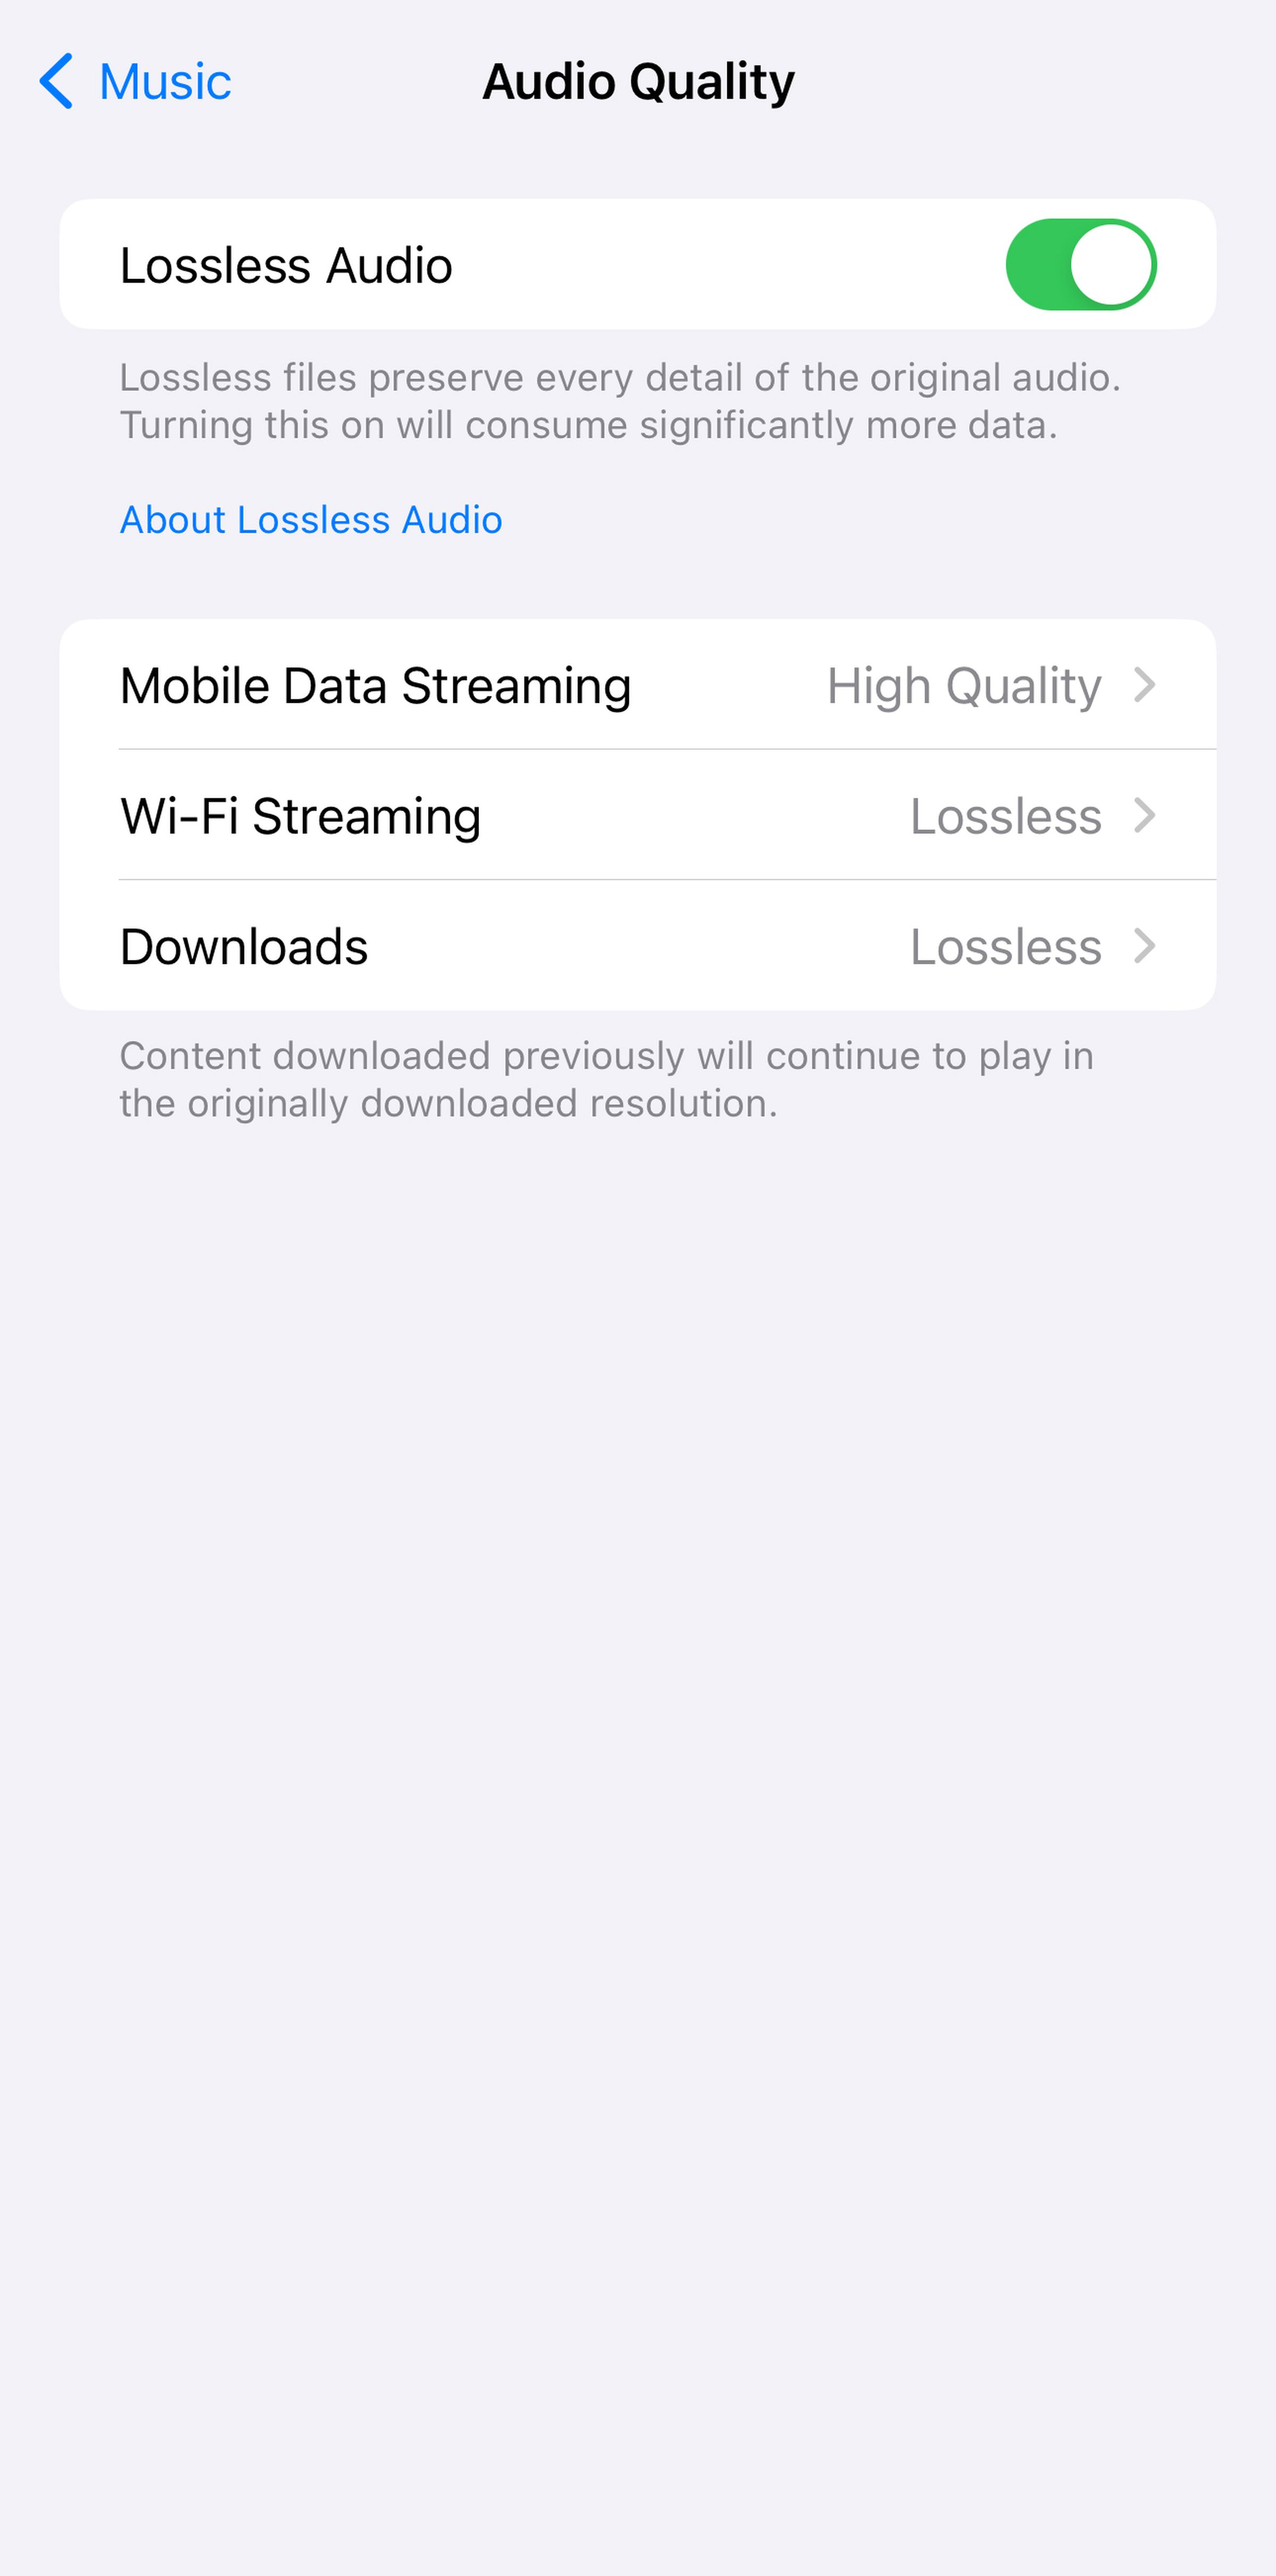 iPhone’s Audio Quality page